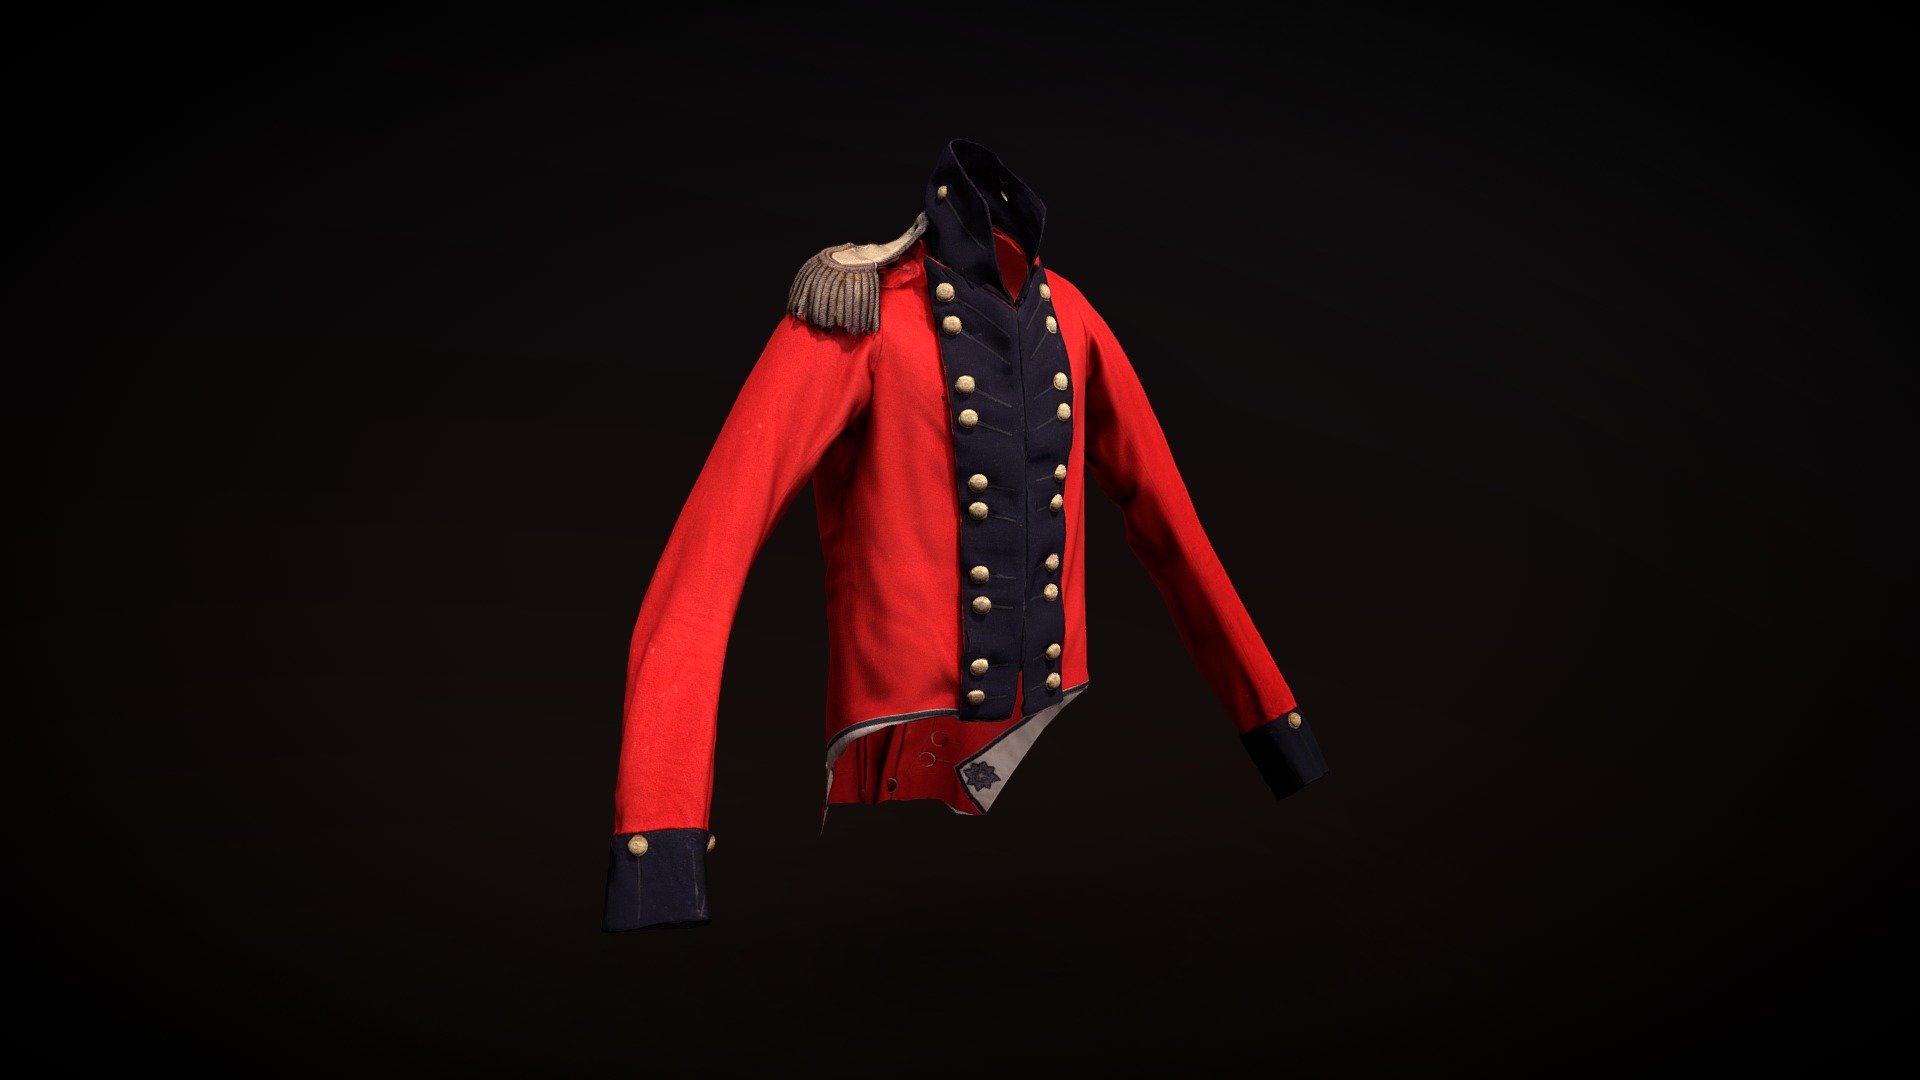 Scarlett Coatee, officer's, 3rd Battalion Company Royal Cornwall Local Militia. Scarlet short tailed coatee of the Waterloo period. Royal blue facings shown on collar, cuffs and front turnbacks. Pocket in each side of the tails accessible from the outside. Ten large buttons down front turnbacks on each side, each side arranged in five pairs. Dummy pocket flaps on each tail secured by four large buttons on each flap arranged in two pairs at the same spacing as the front turnbacks. Four large buttons on each tail, arranged on each side one at waist. Blue turnback cuffs, cut square with each cuff secured by four large buttons, spaced in two pairs as for front turnbacks. Two small buttons on collar, and all buttons have long imitation button holes embroidered in dark blue or black on the facings and in scarlet on the scarlet.
The model was created by Purpose3D. If you are interested in purchasing the model, please get in touch with Purpose 3D 3d model